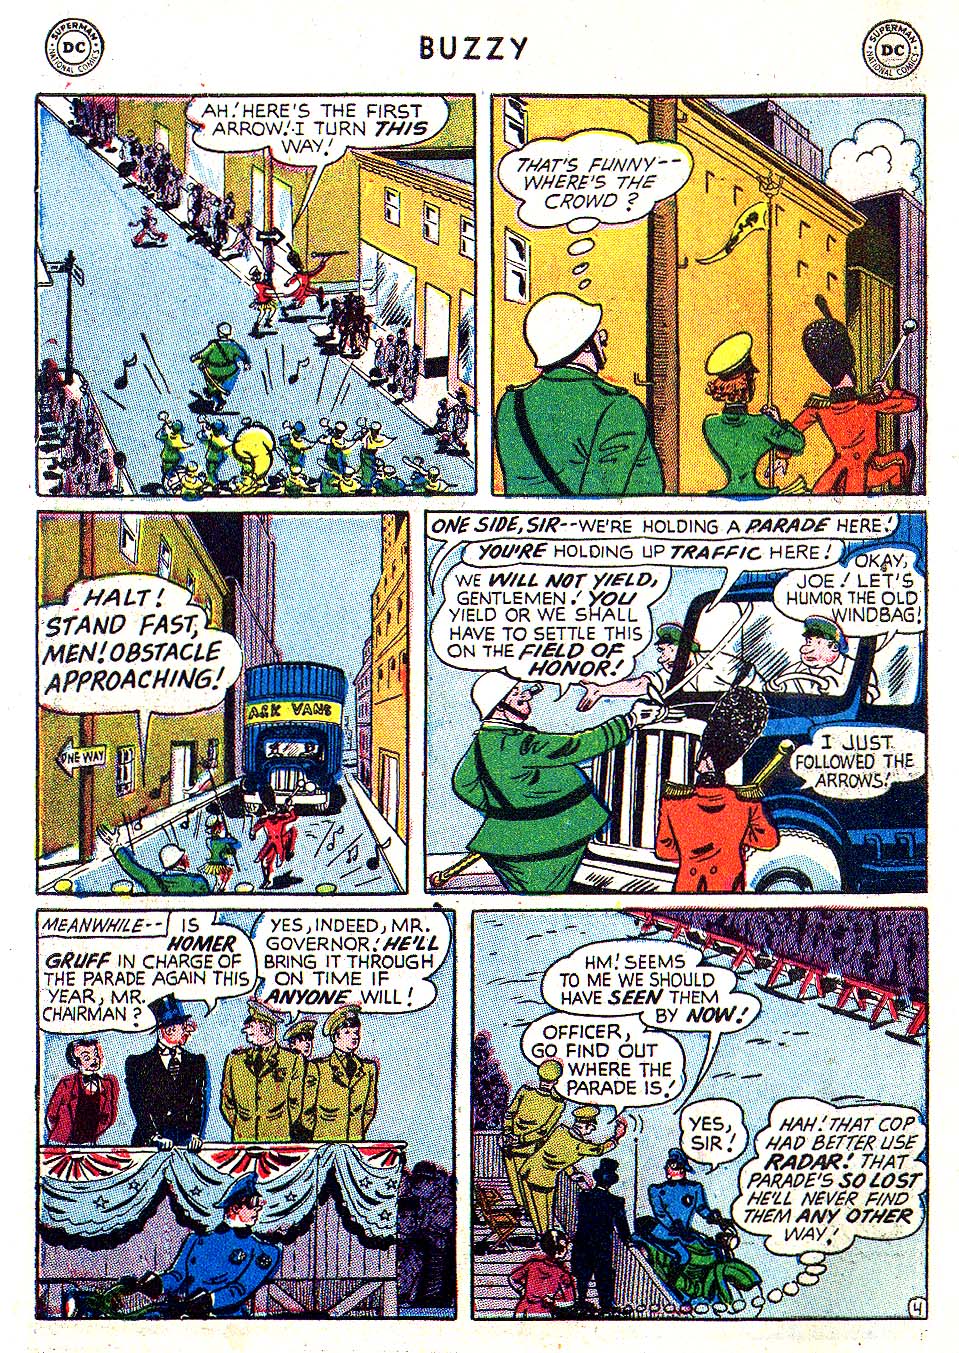 Read online Buzzy comic -  Issue #63 - 6